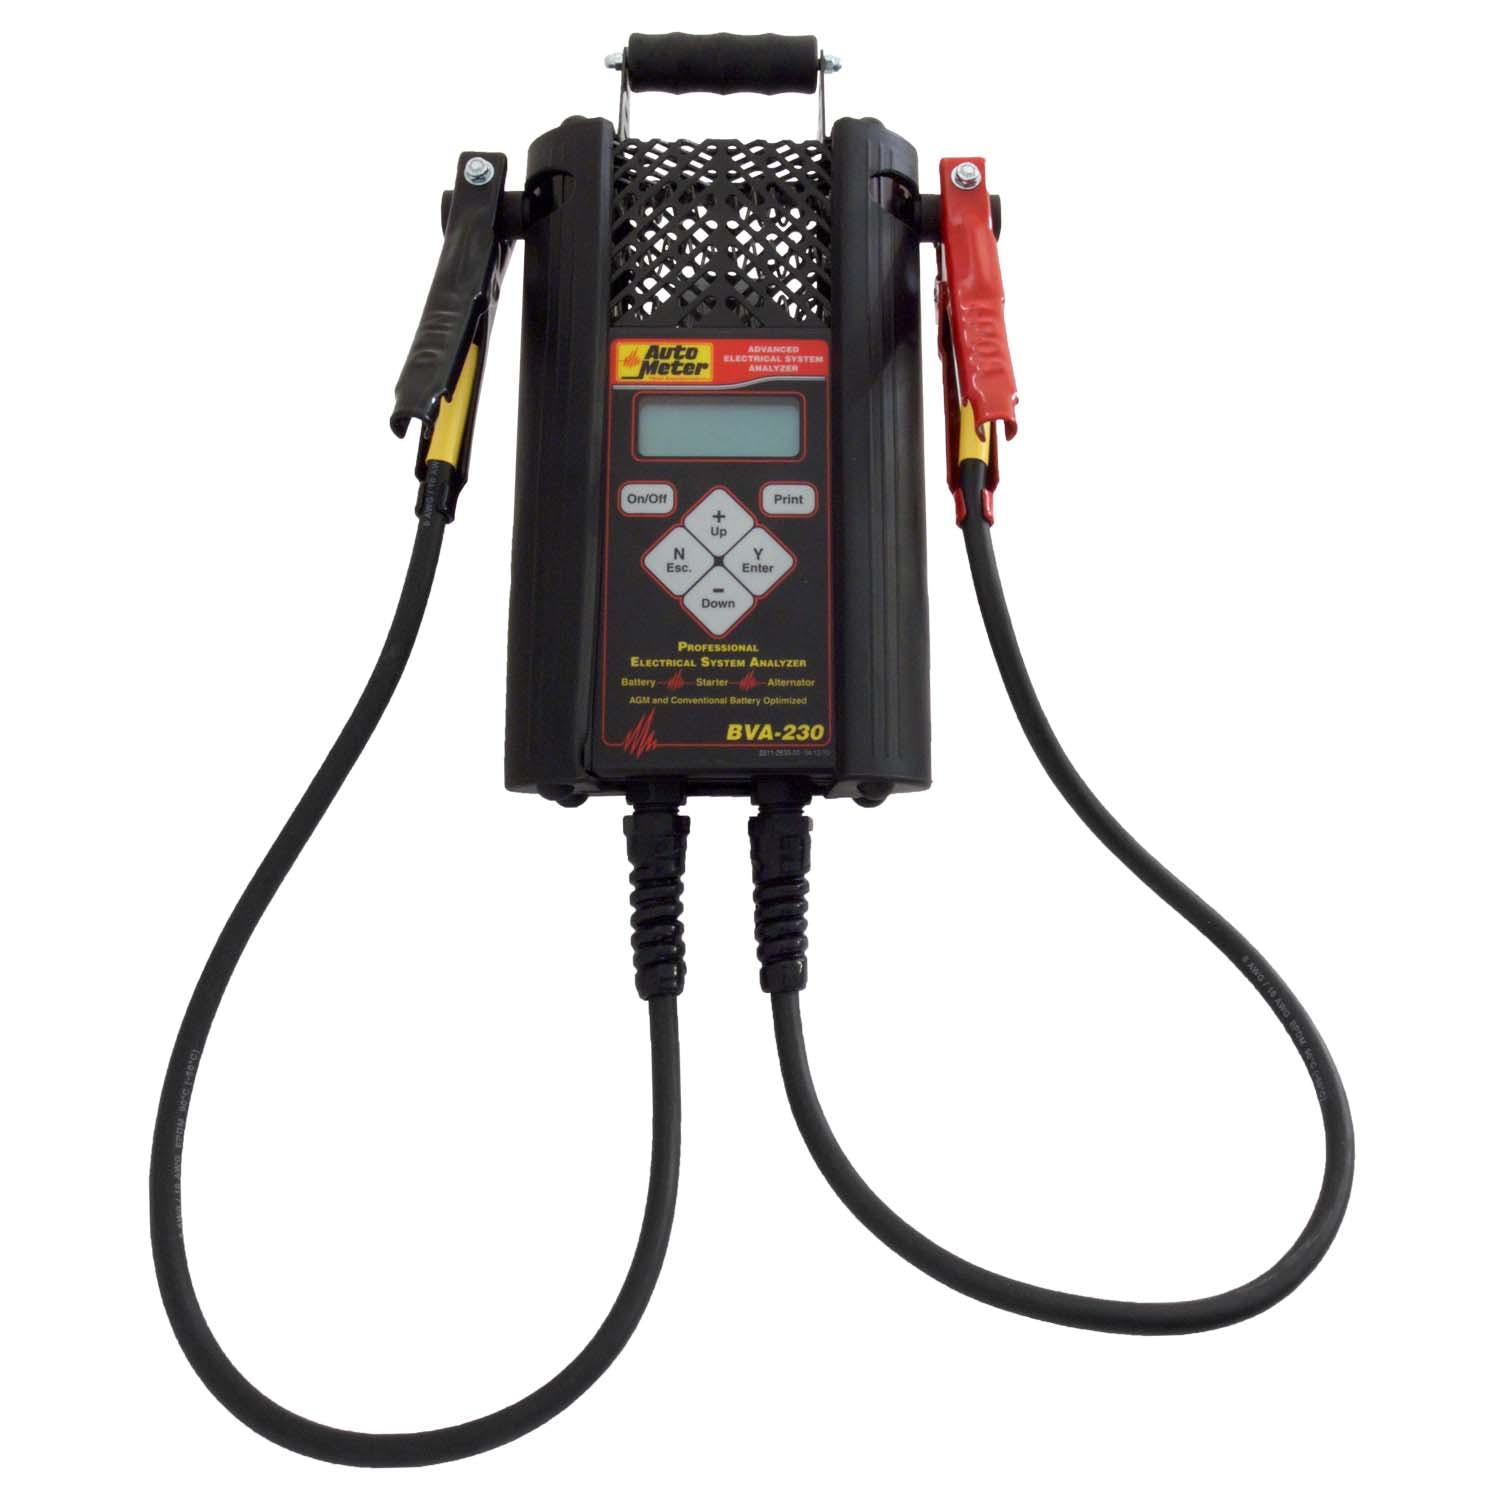 AutoMeter Products BVA-230 Handheld Electrical System Analyzer